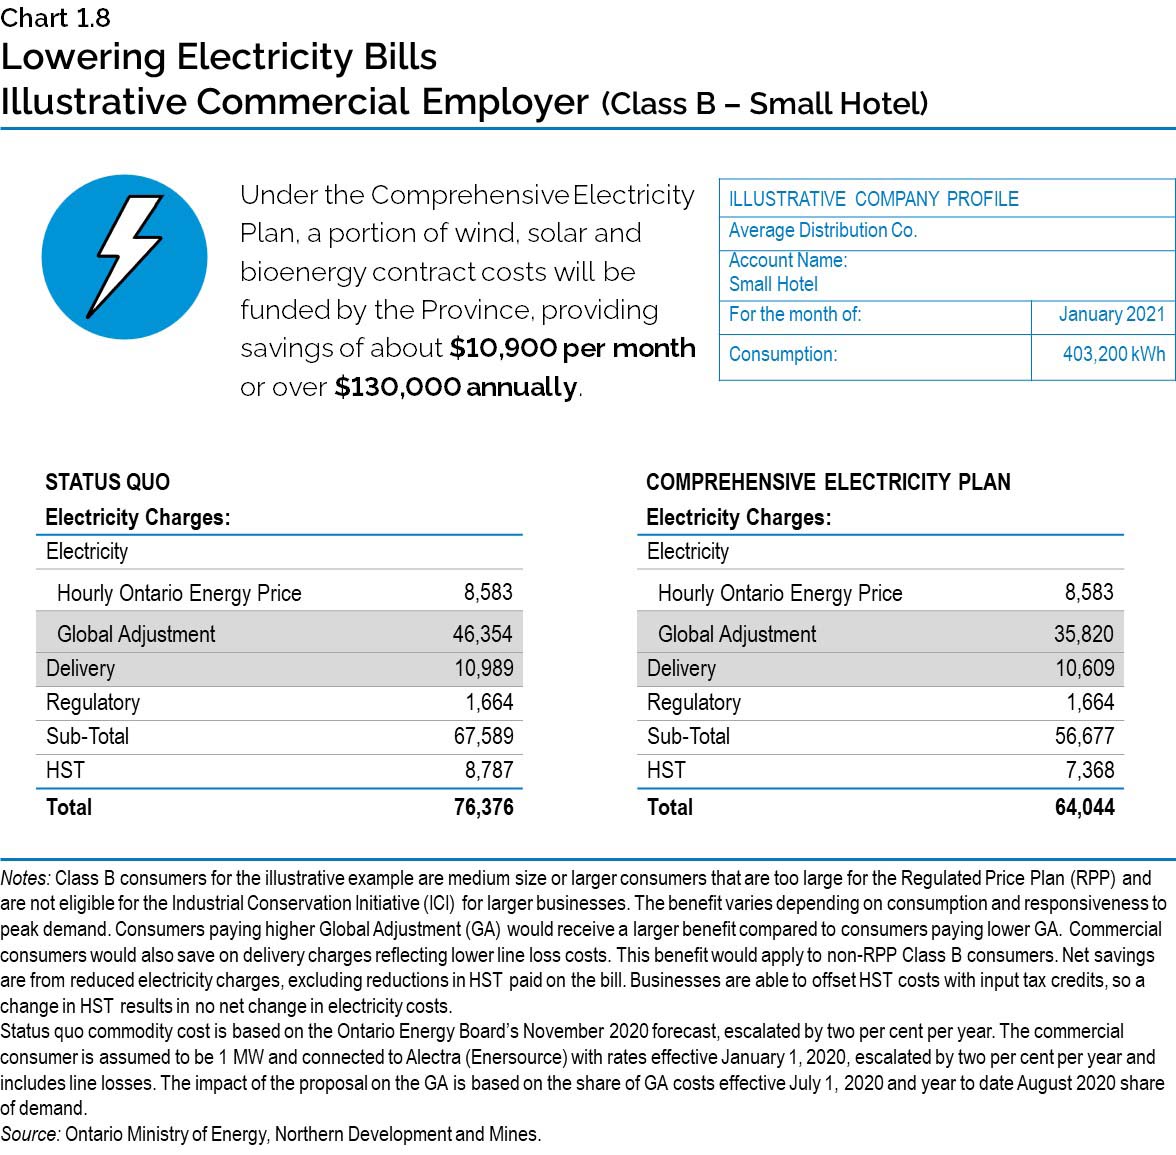 Chart 1.8: Lowering Electricity Bills – Illustrative Commercial Employer